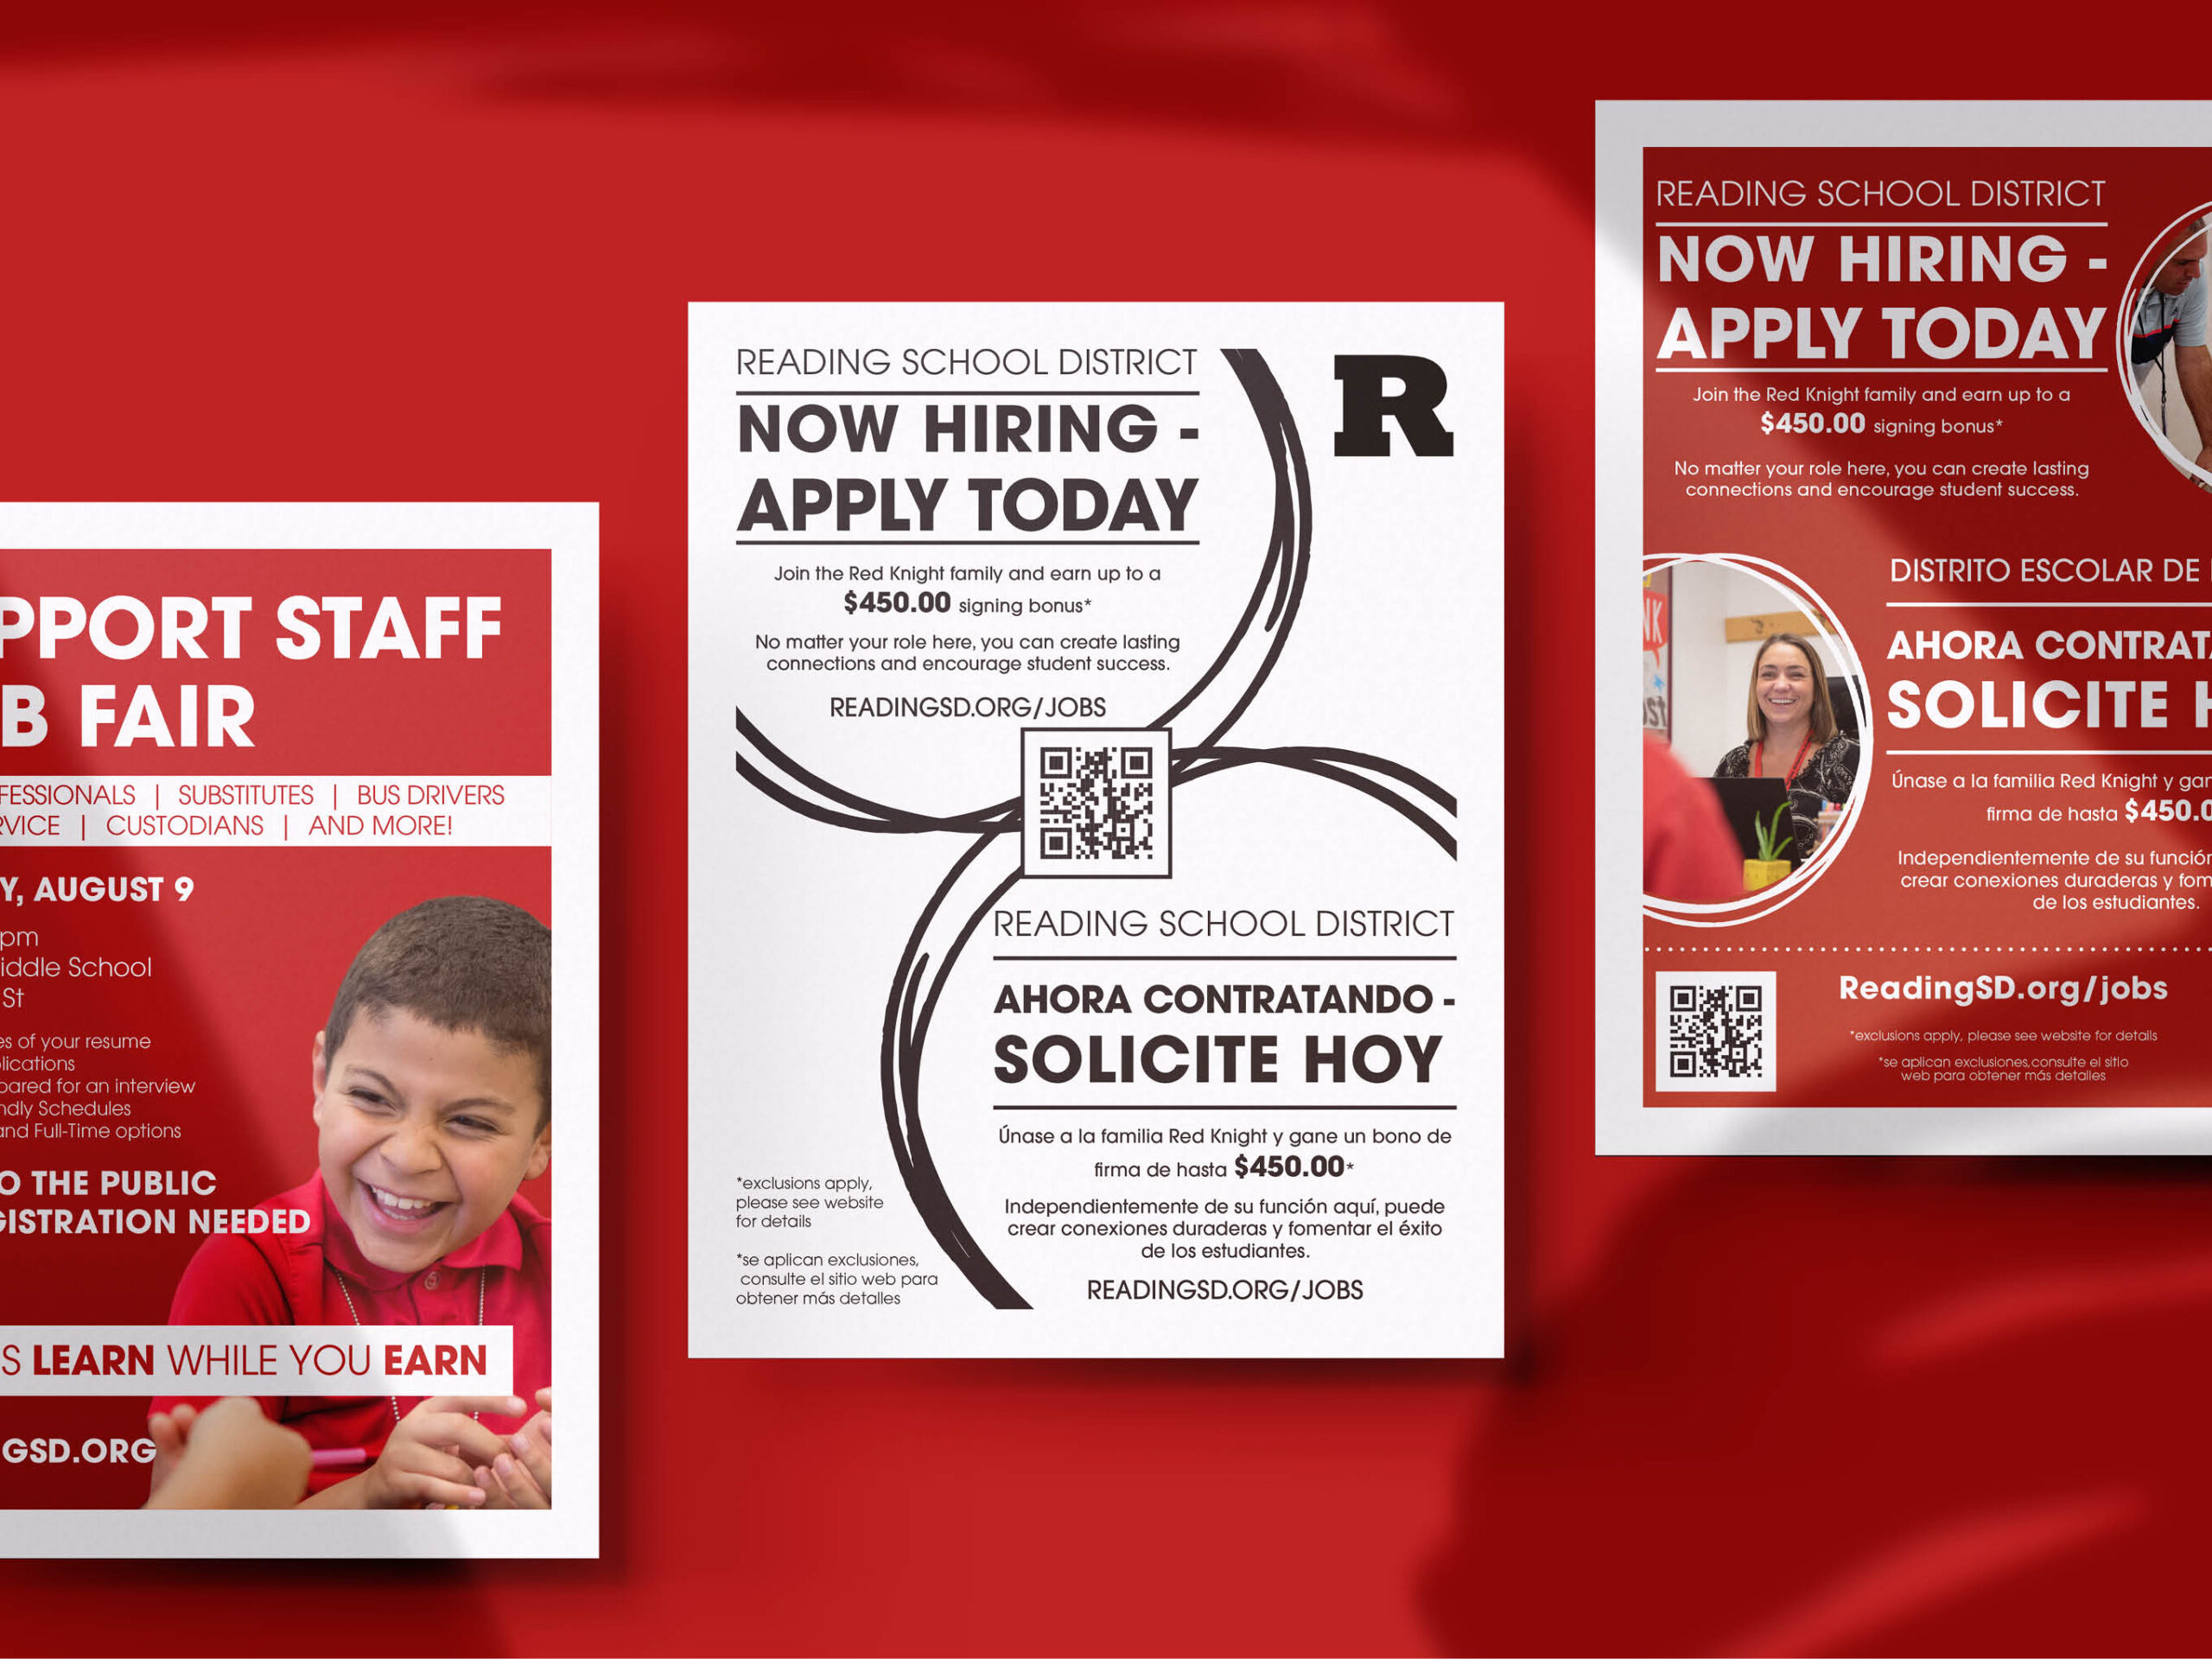 Hiring flyers for Reading School District. The flyers highlight upcoming career fairs, in both english and spanish.